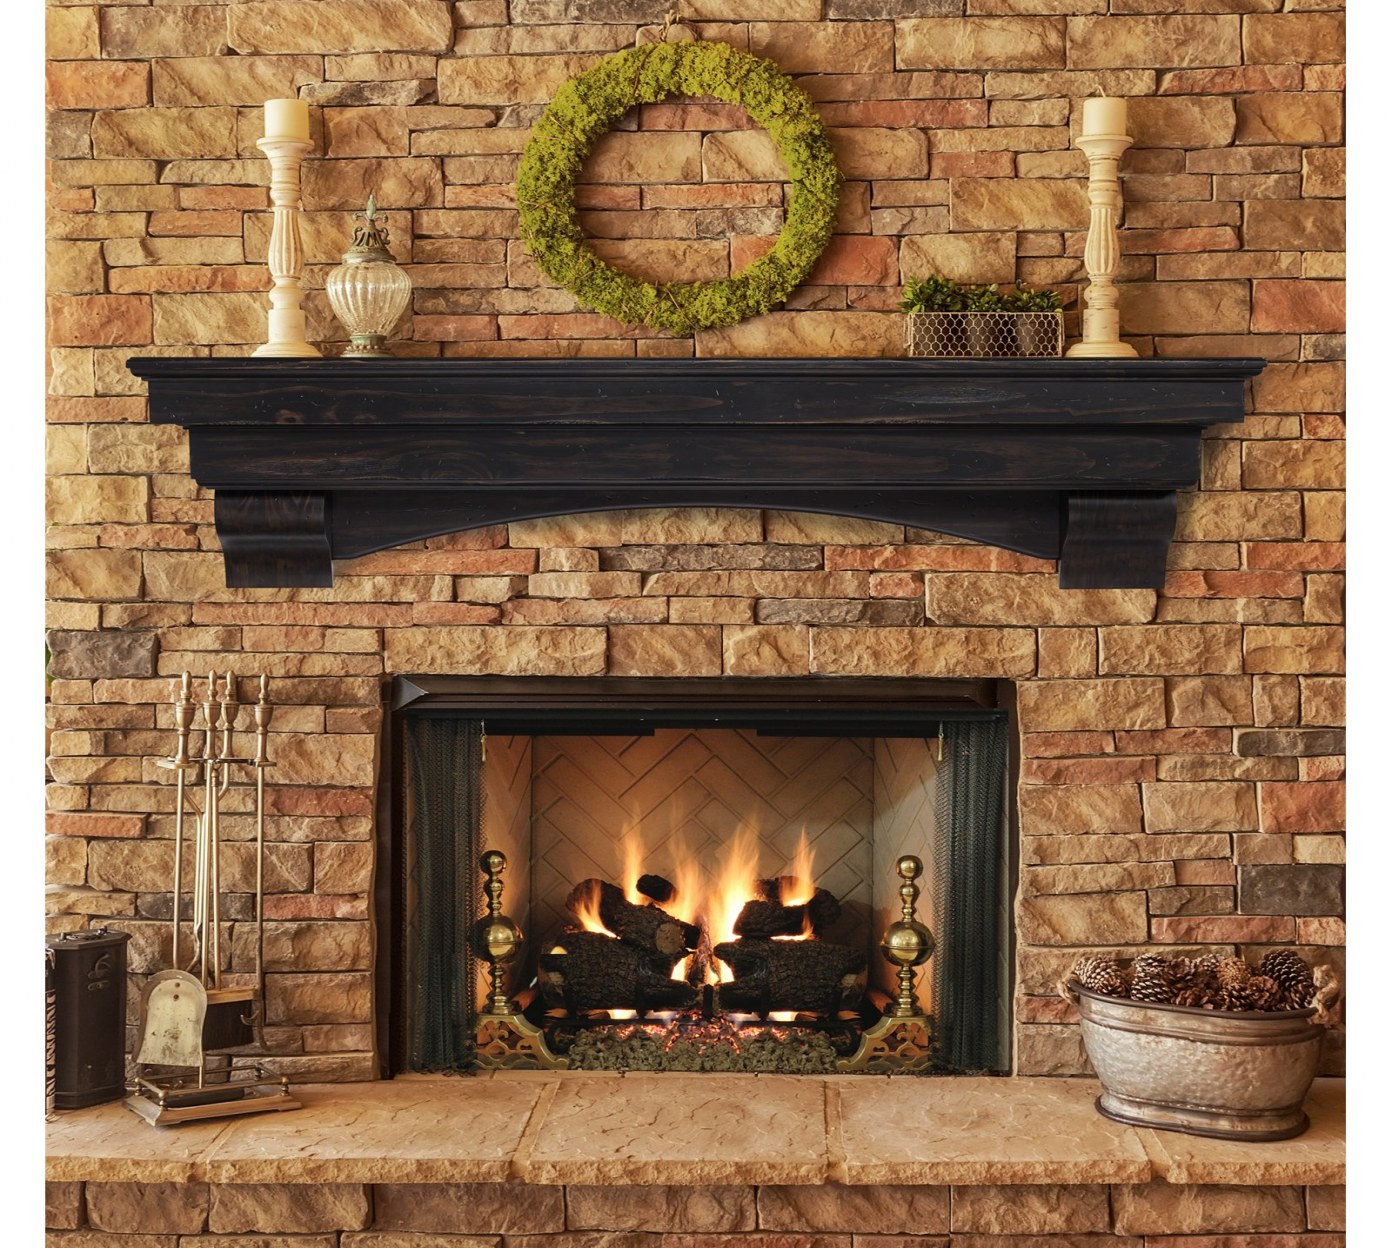 Remove Fireplace Hearth Lovely Fireplace Mantel Shelf Relatively Fireplace Surround with